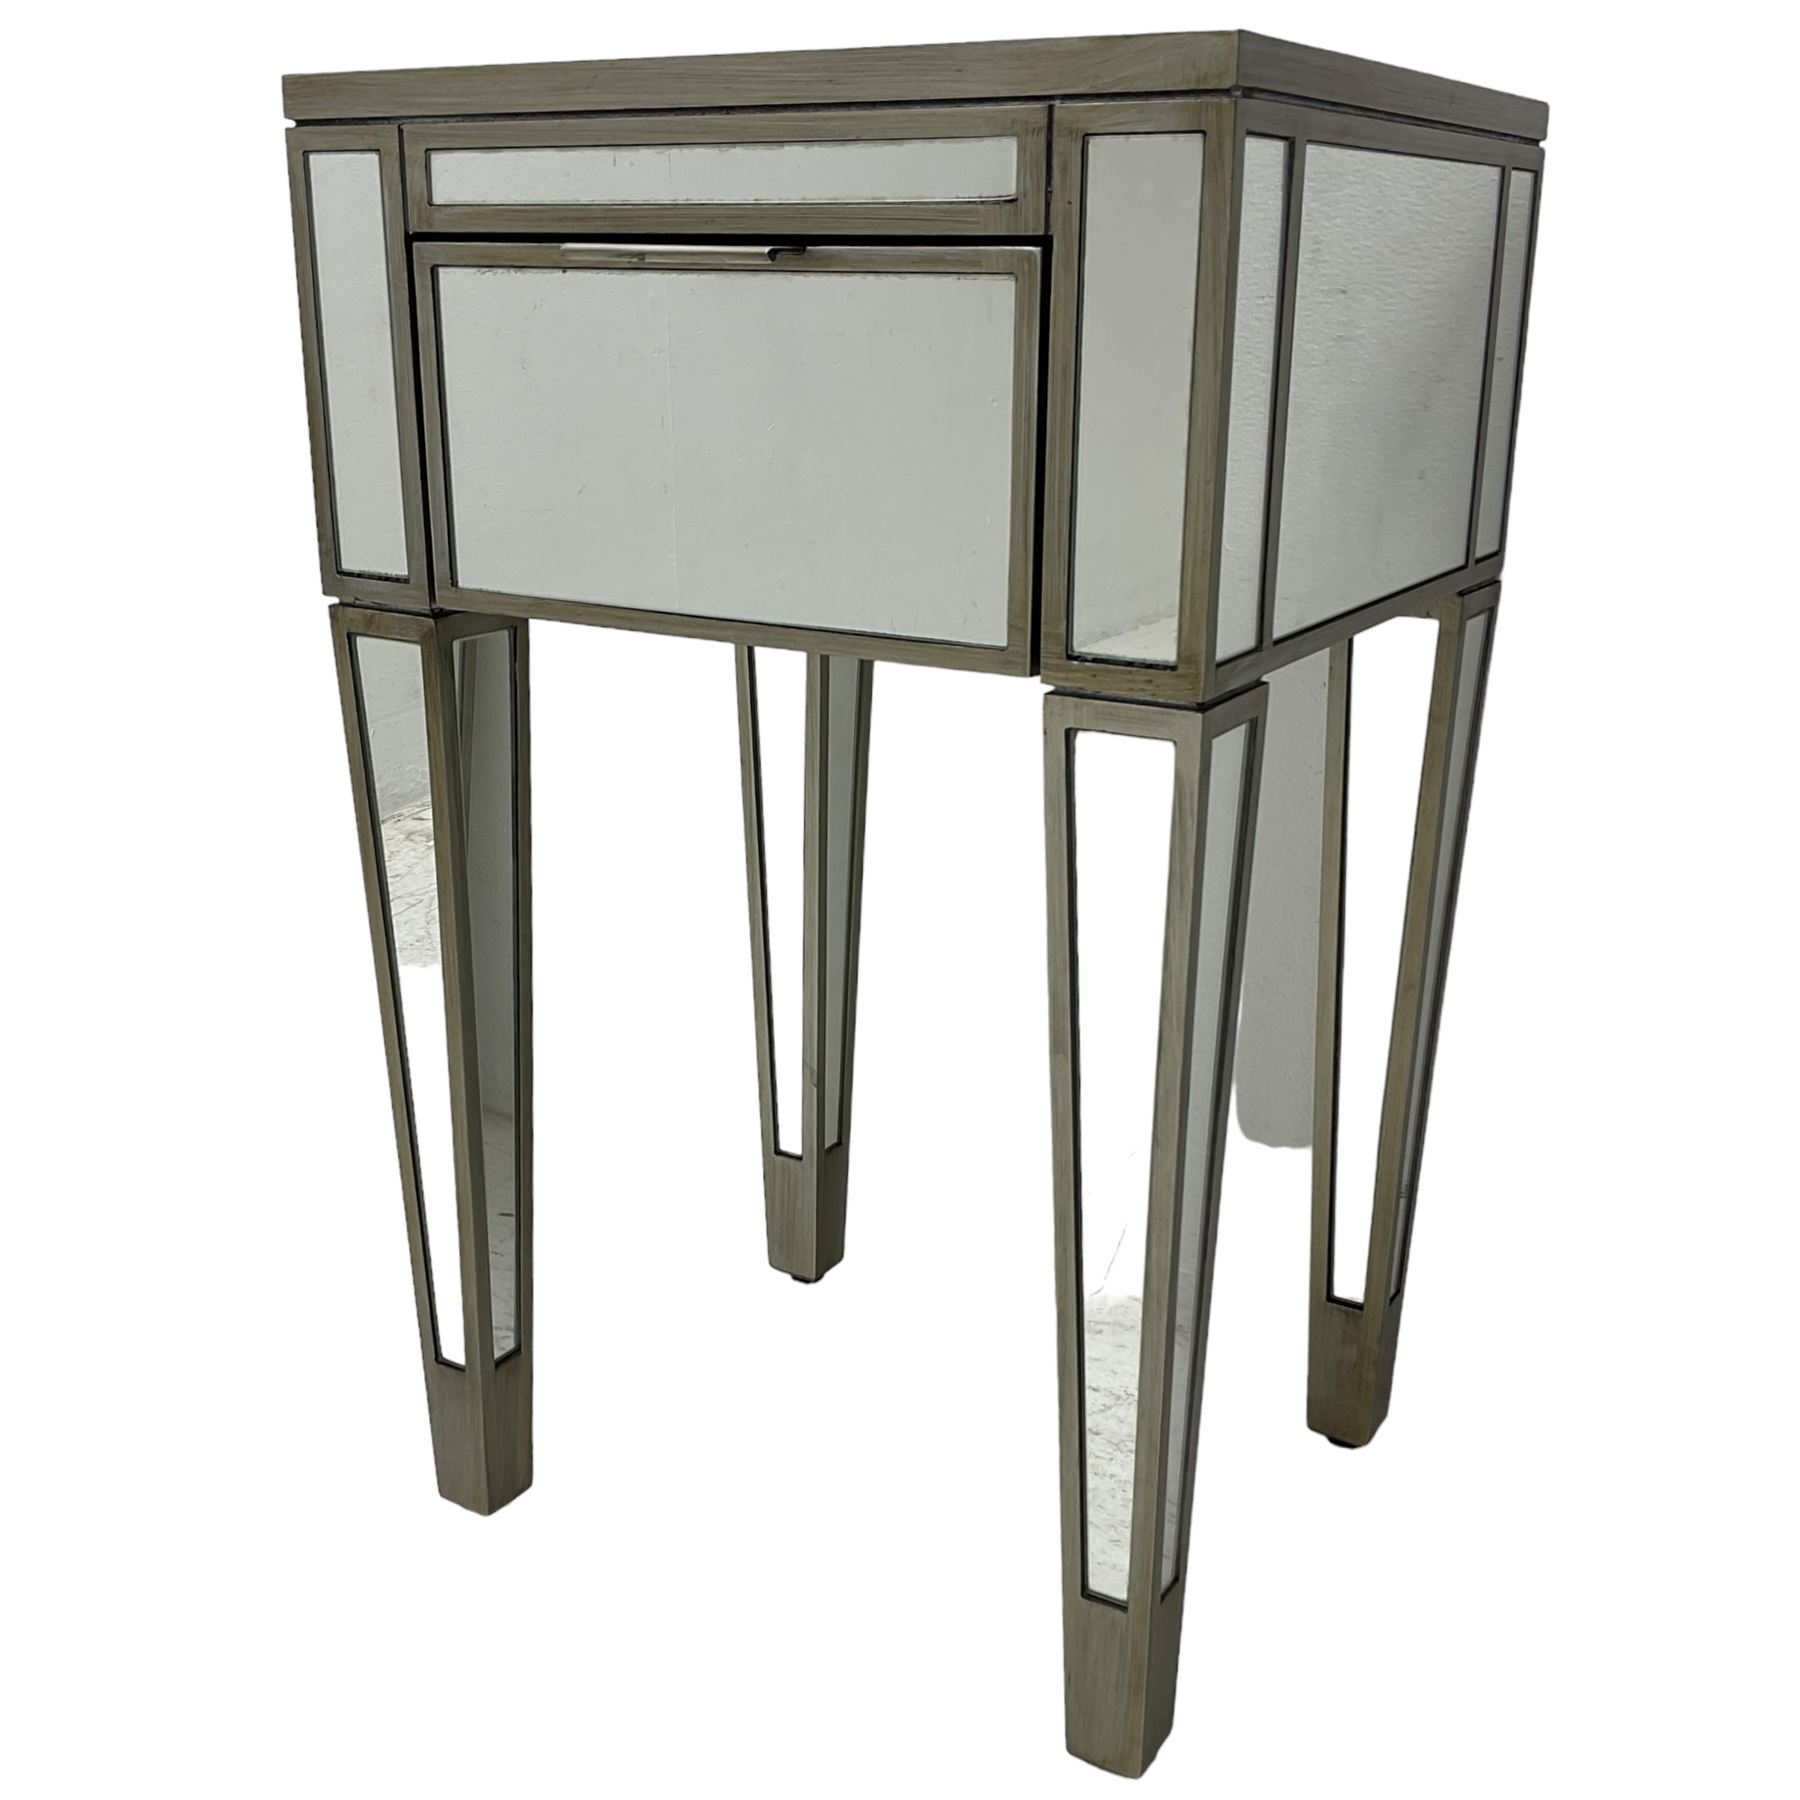 Contemporary mirrored and metal lamp table - Image 5 of 5